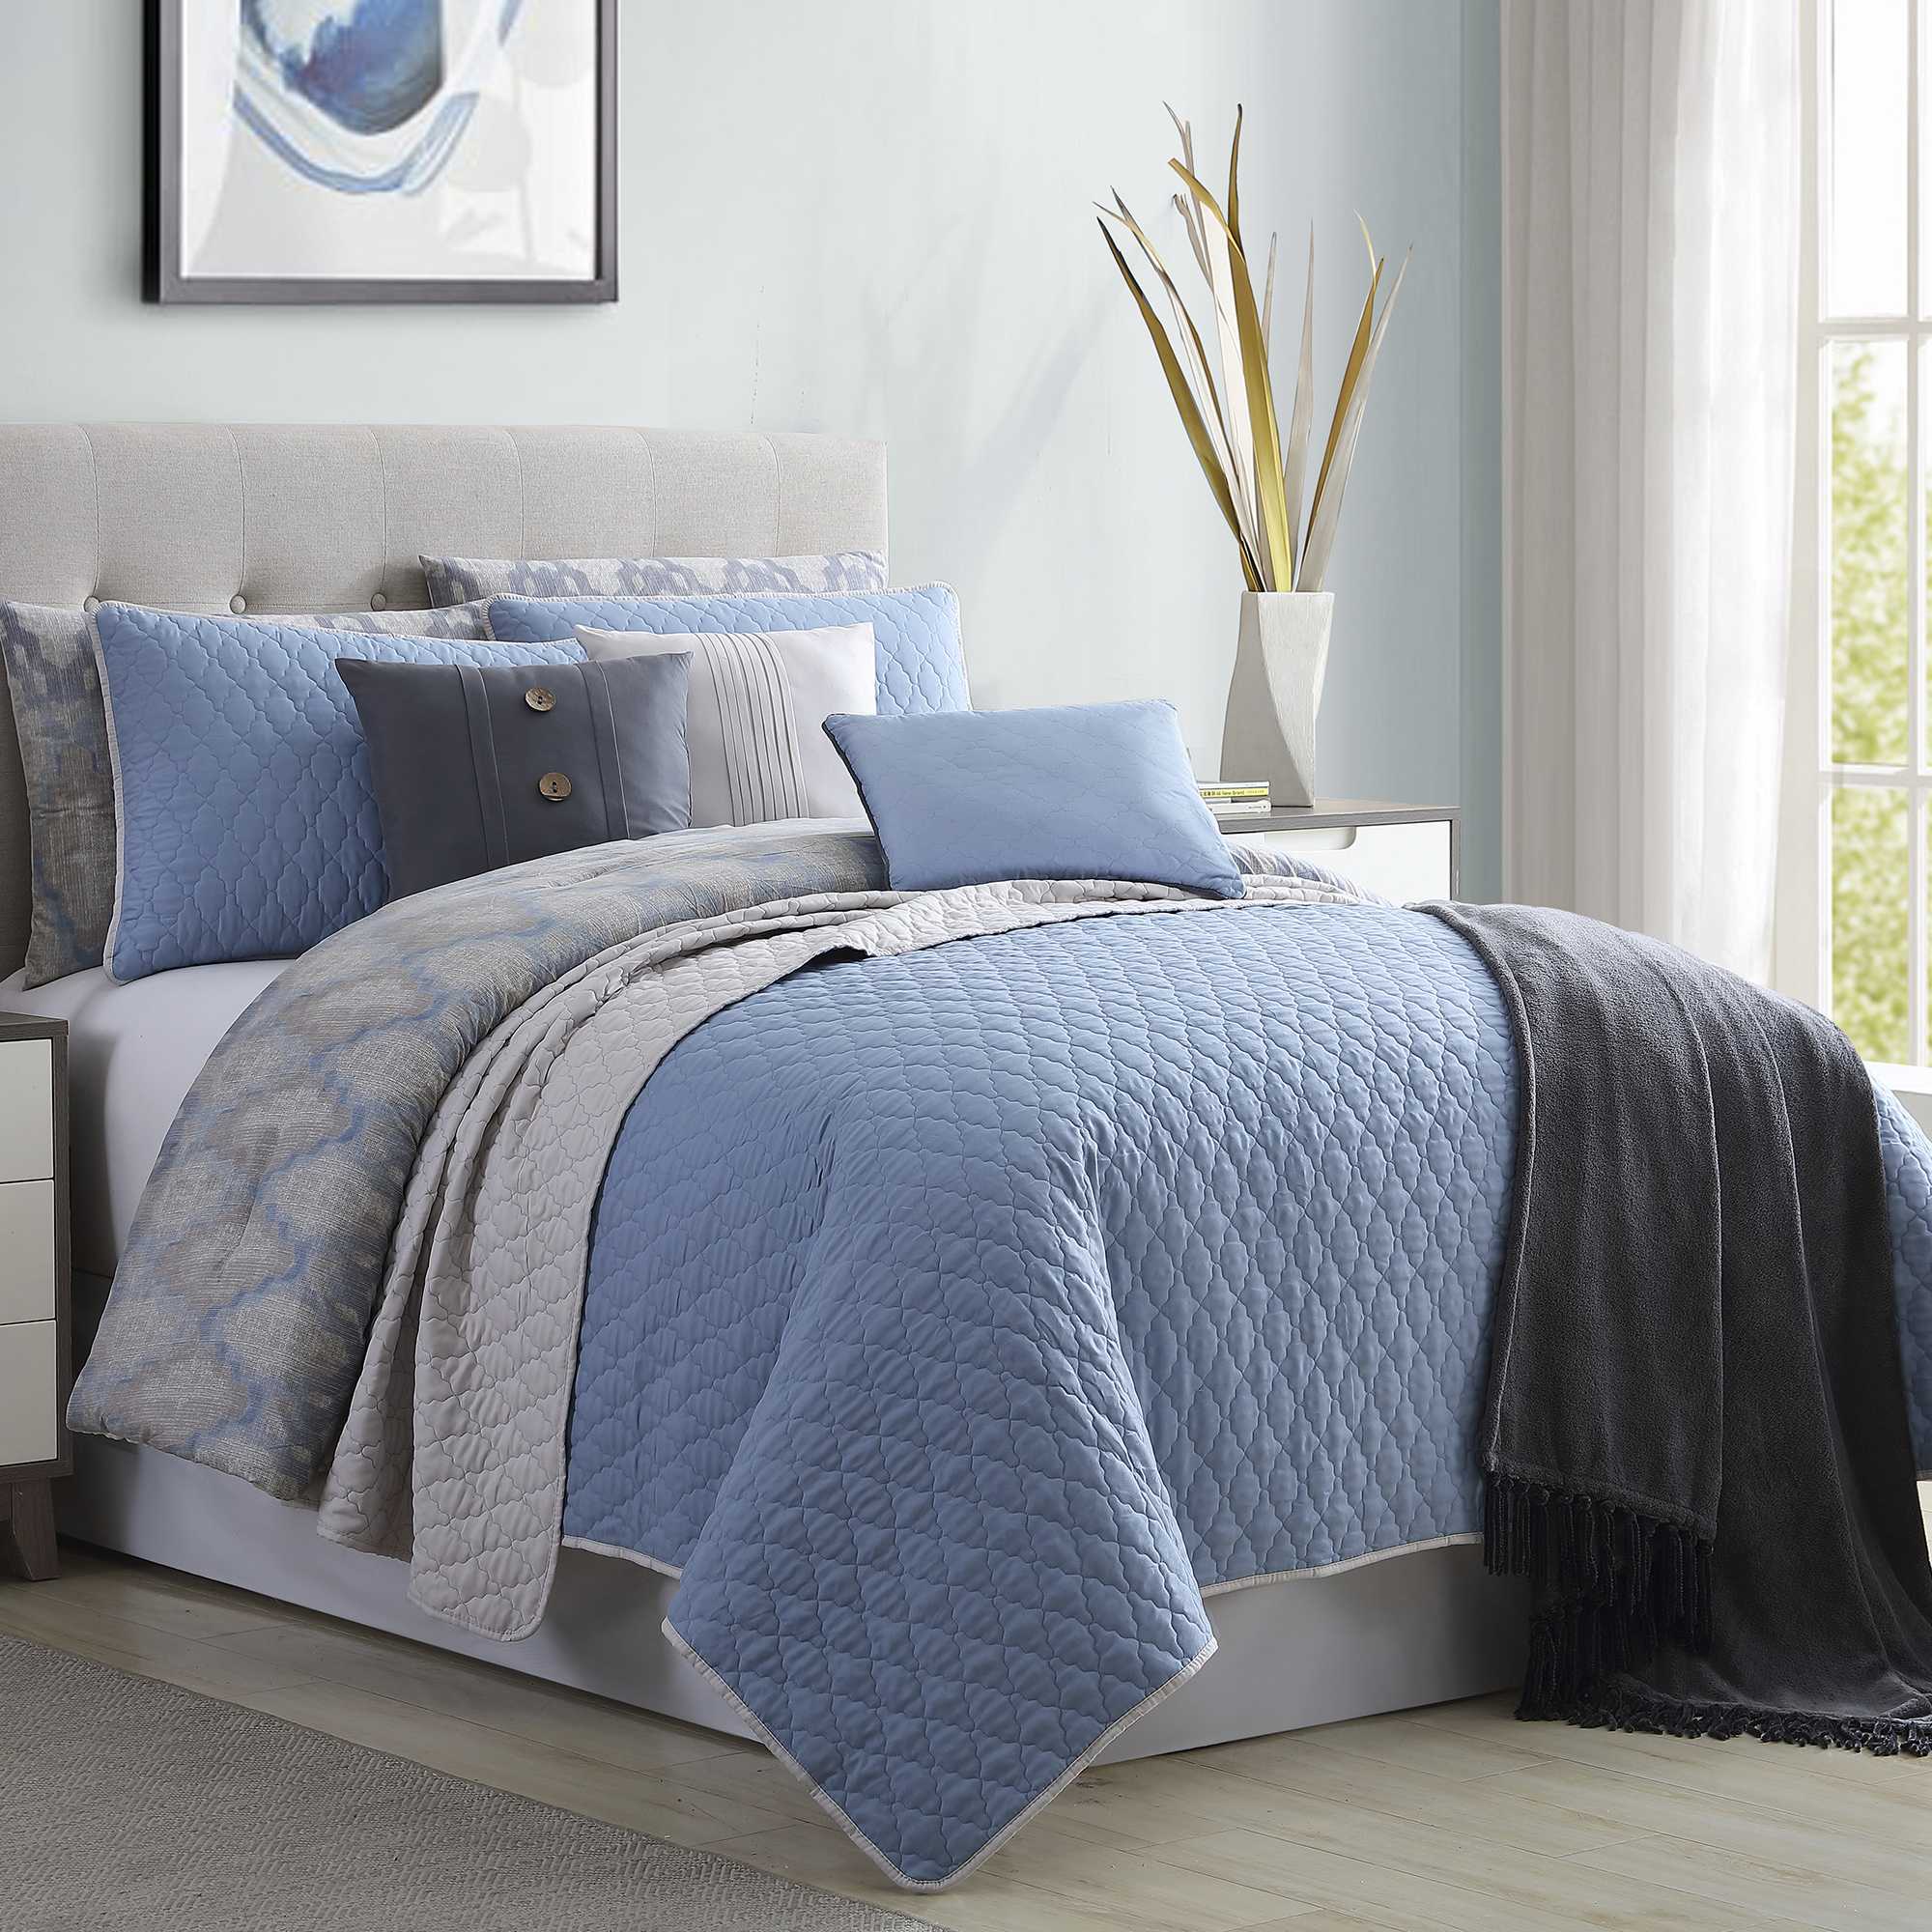 0.2" x 140" x 90" Microfiber Blue and Gray  10 Piece King Size Comforter and Coverlet Set